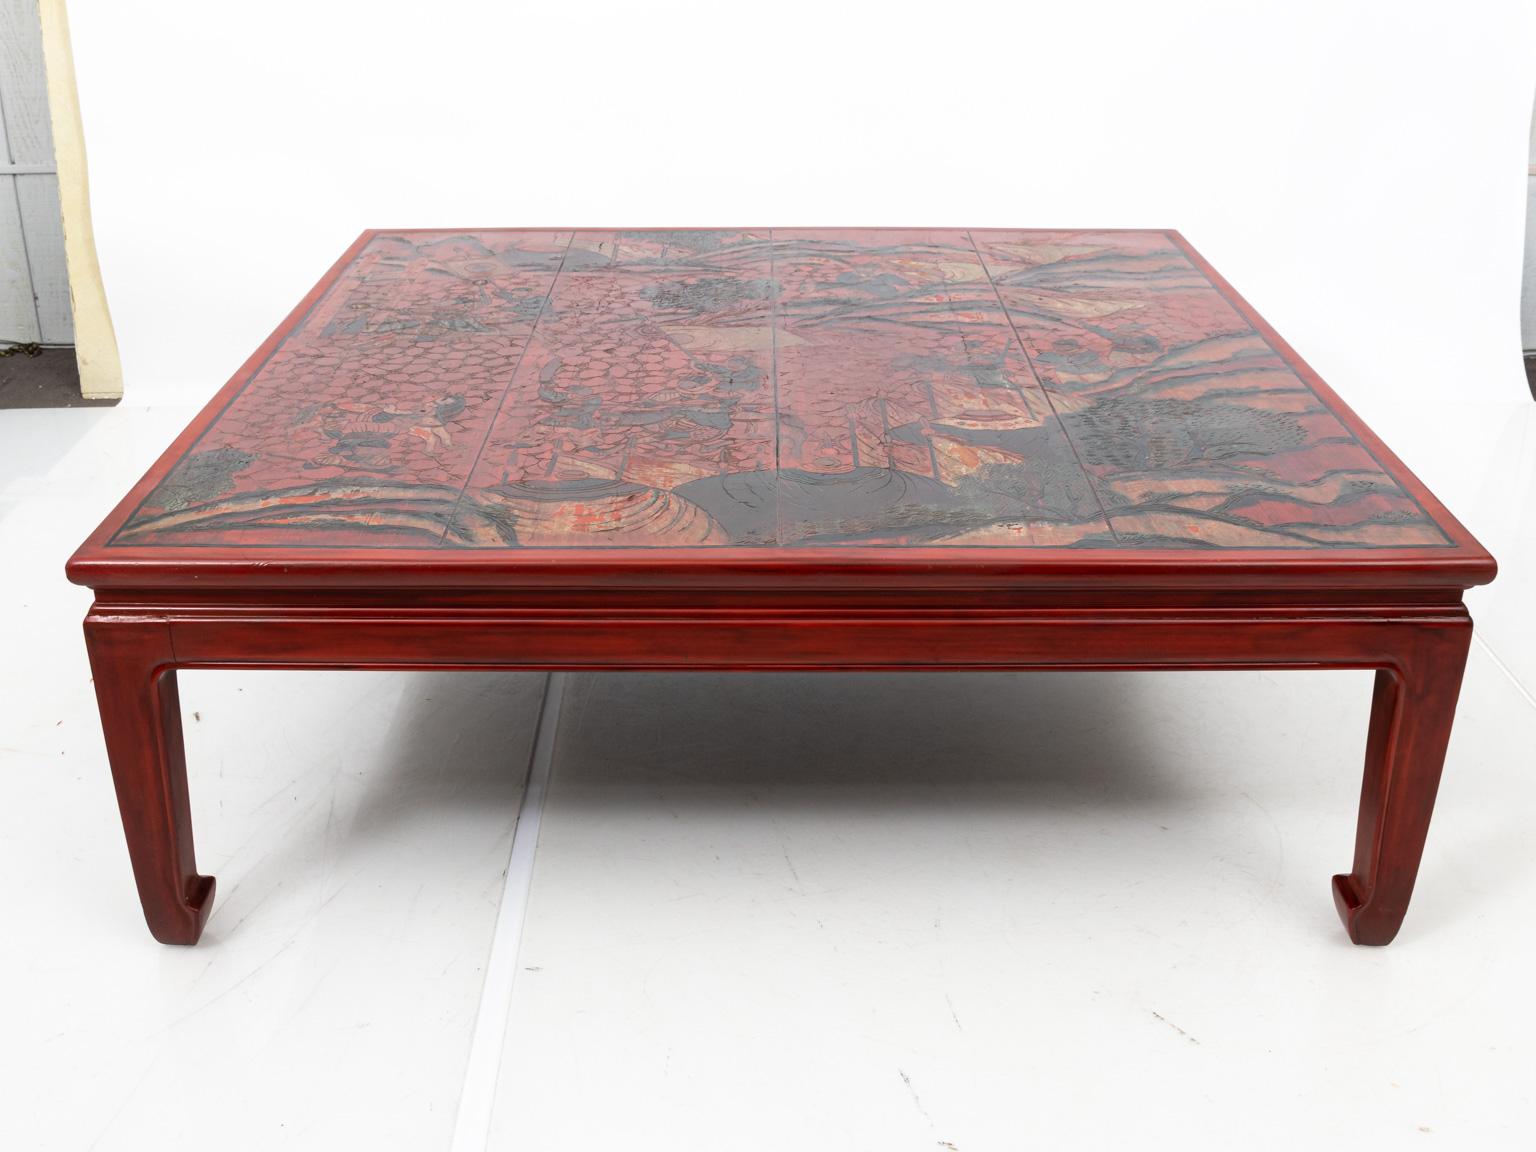 Large Chinese coffee table with decorative, painted tabletop. Please note of wear consistent with age.